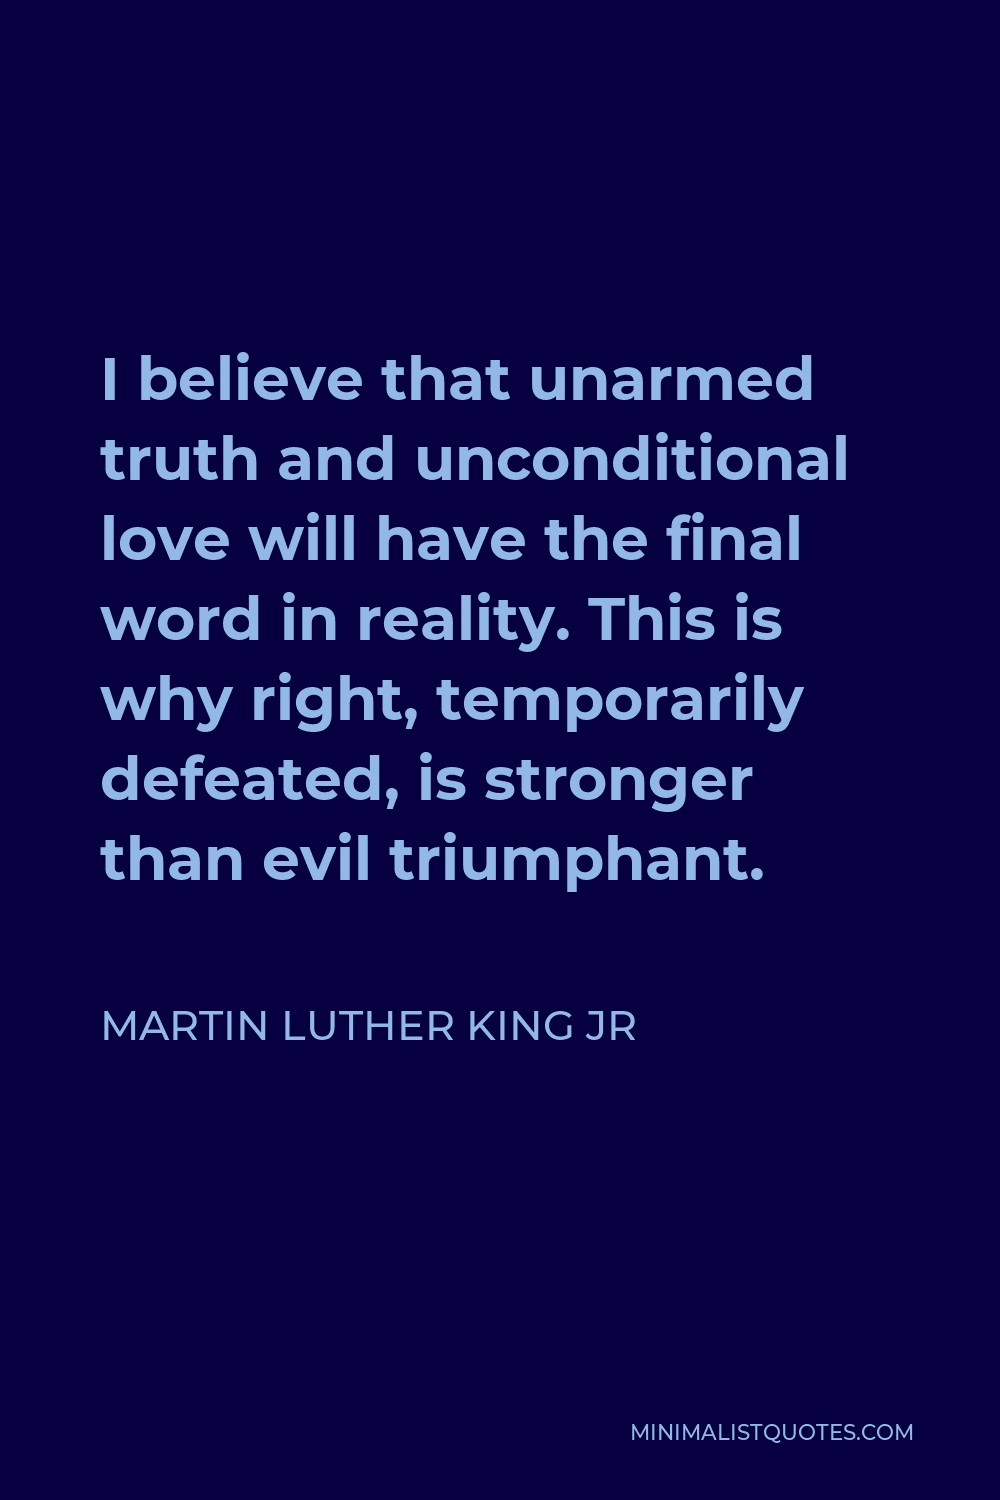 Martin Luther King Jr Quote - I believe that unarmed truth and unconditional love will have the final word in reality. This is why right, temporarily defeated, is stronger than evil triumphant.